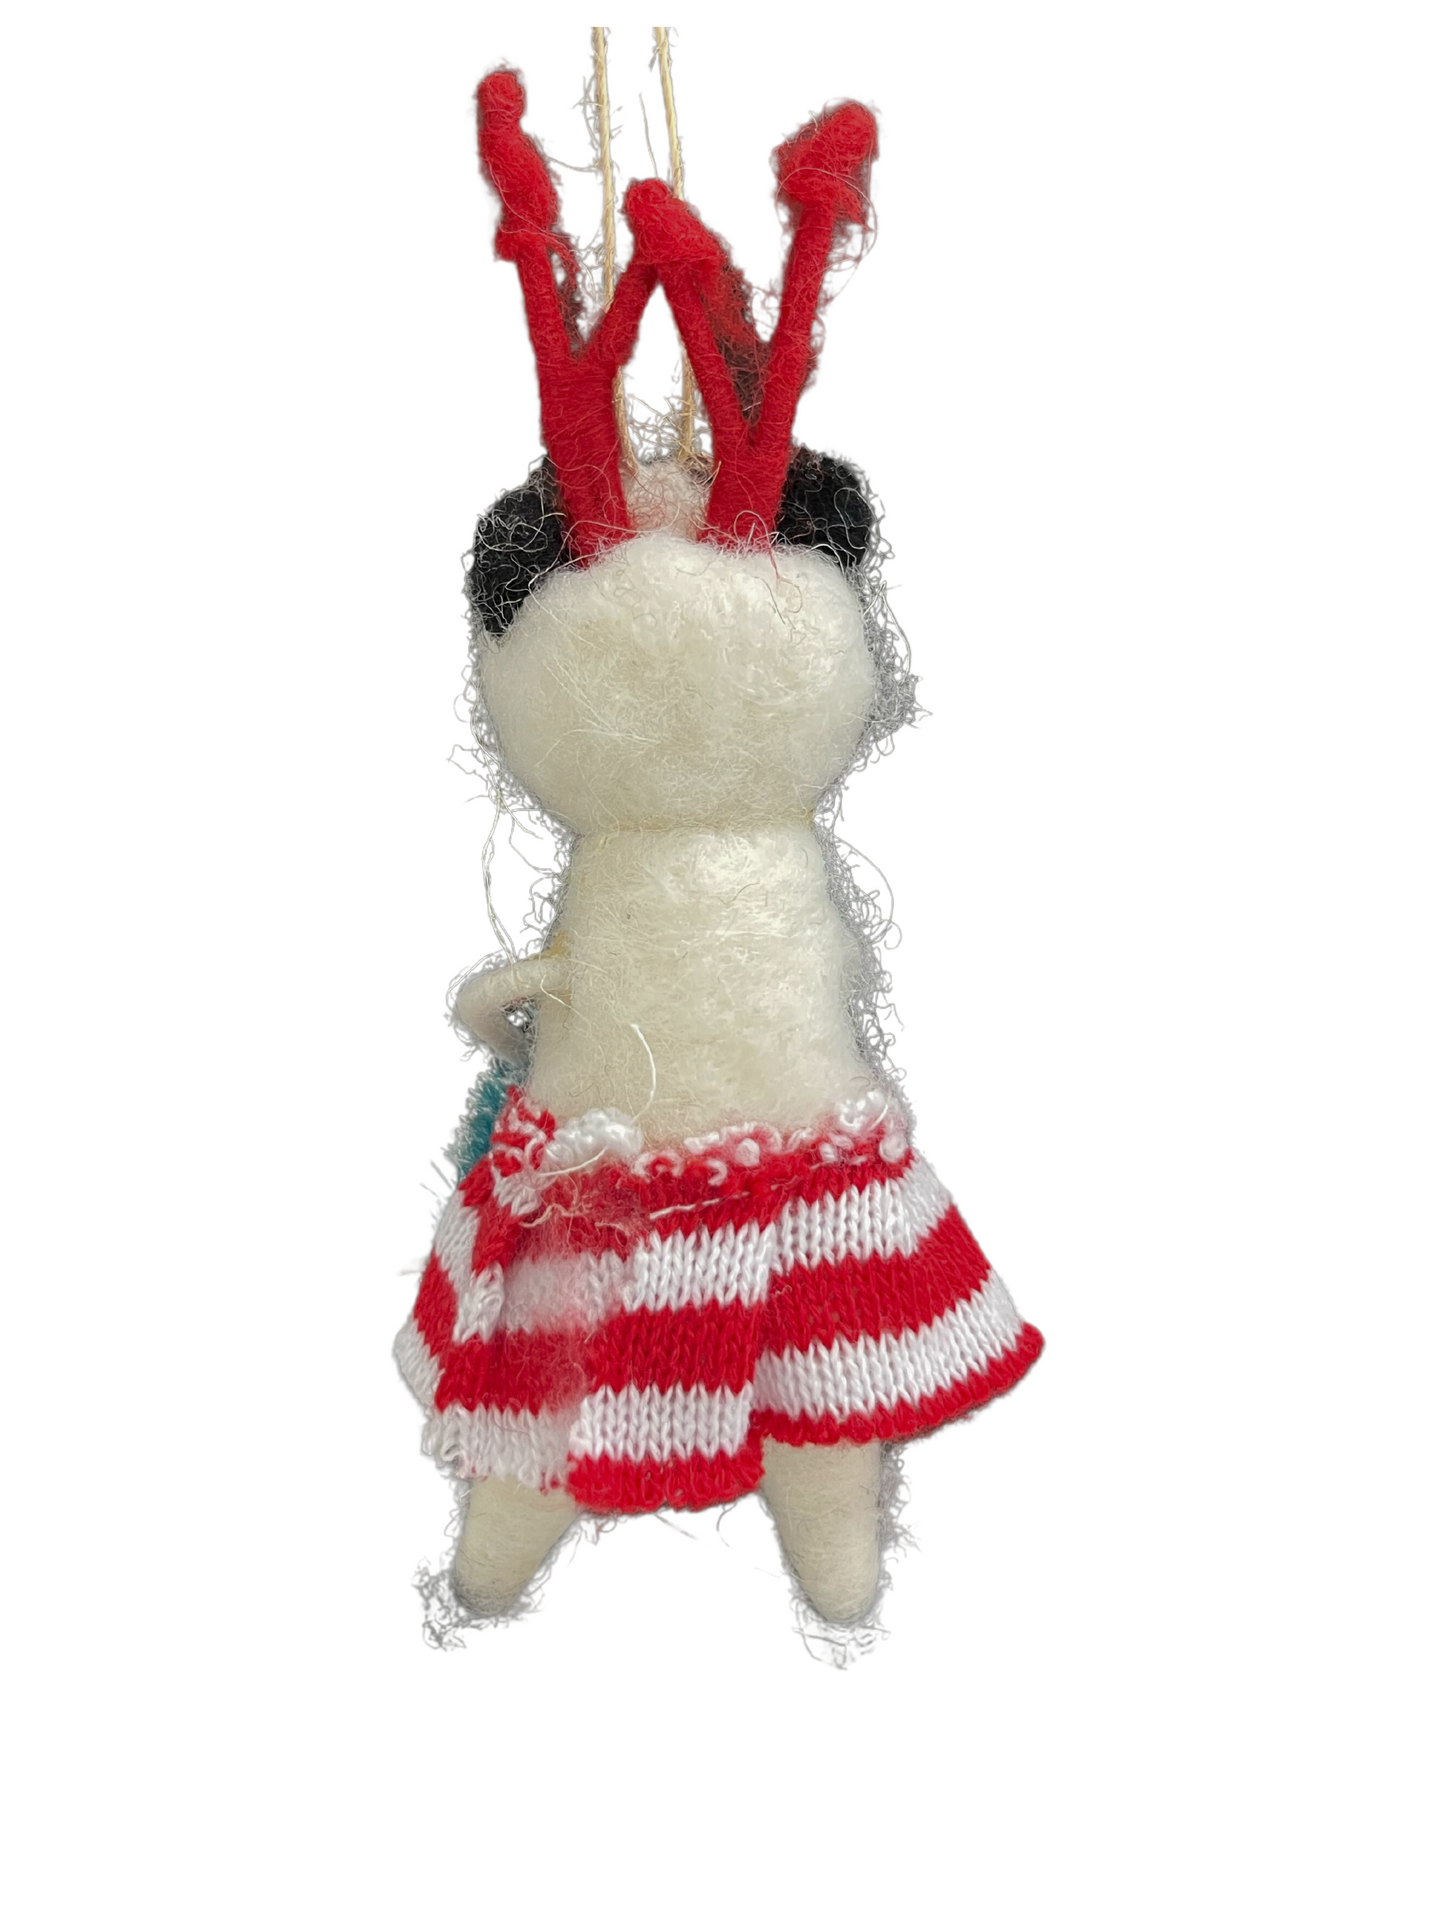 Felt Panda In Striped Clothes Wooly Antlers Ornament